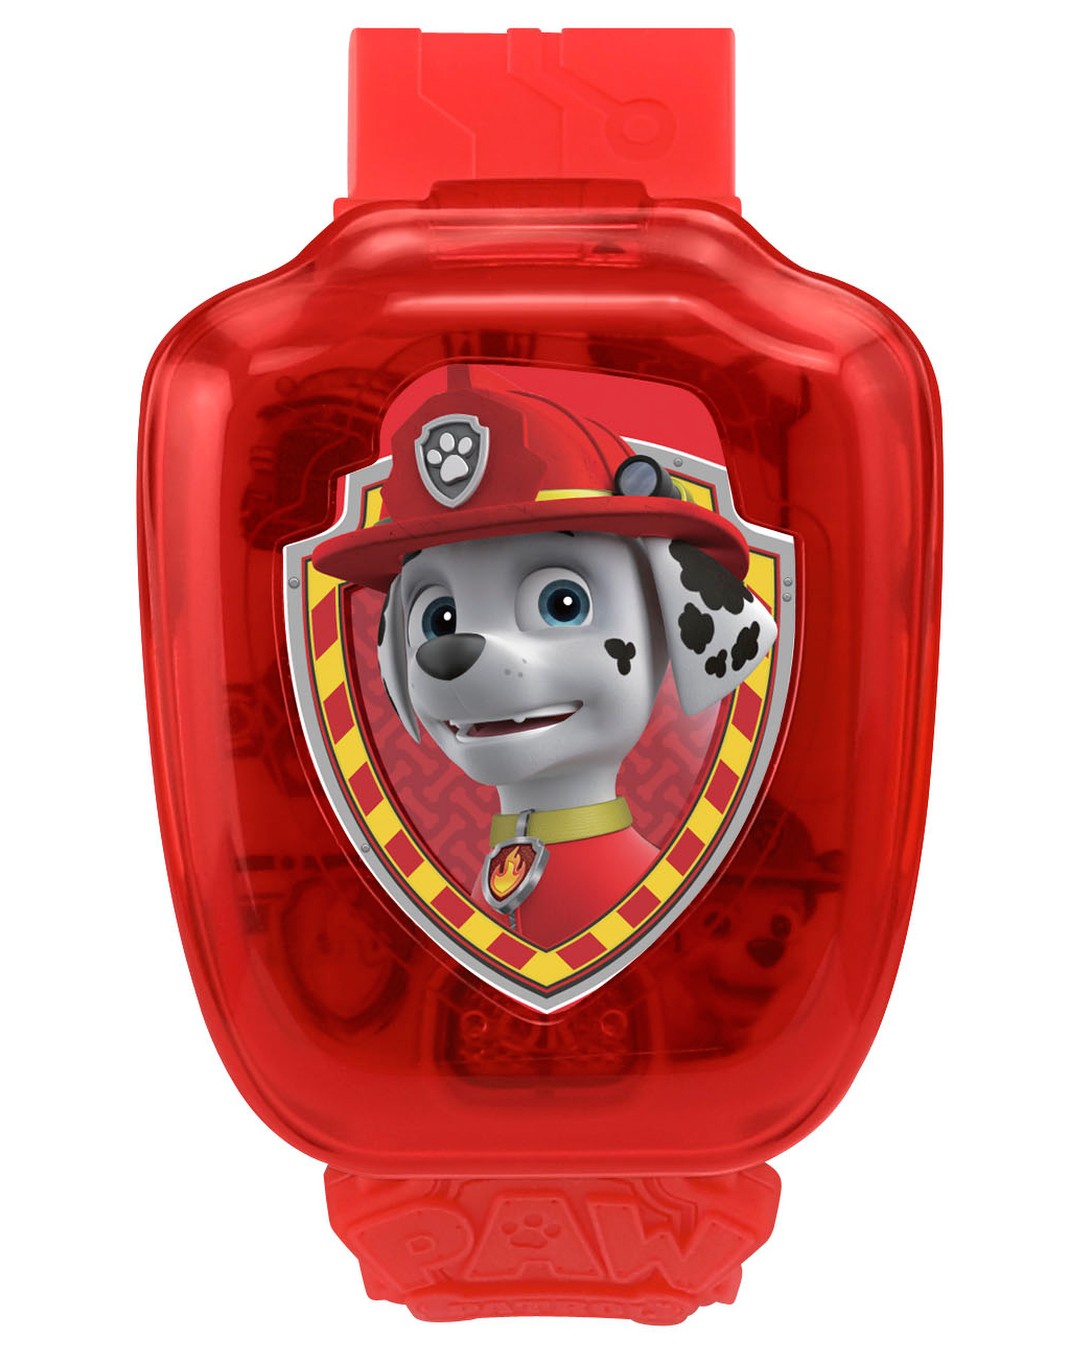 vtech paw patrol read and learn marshall